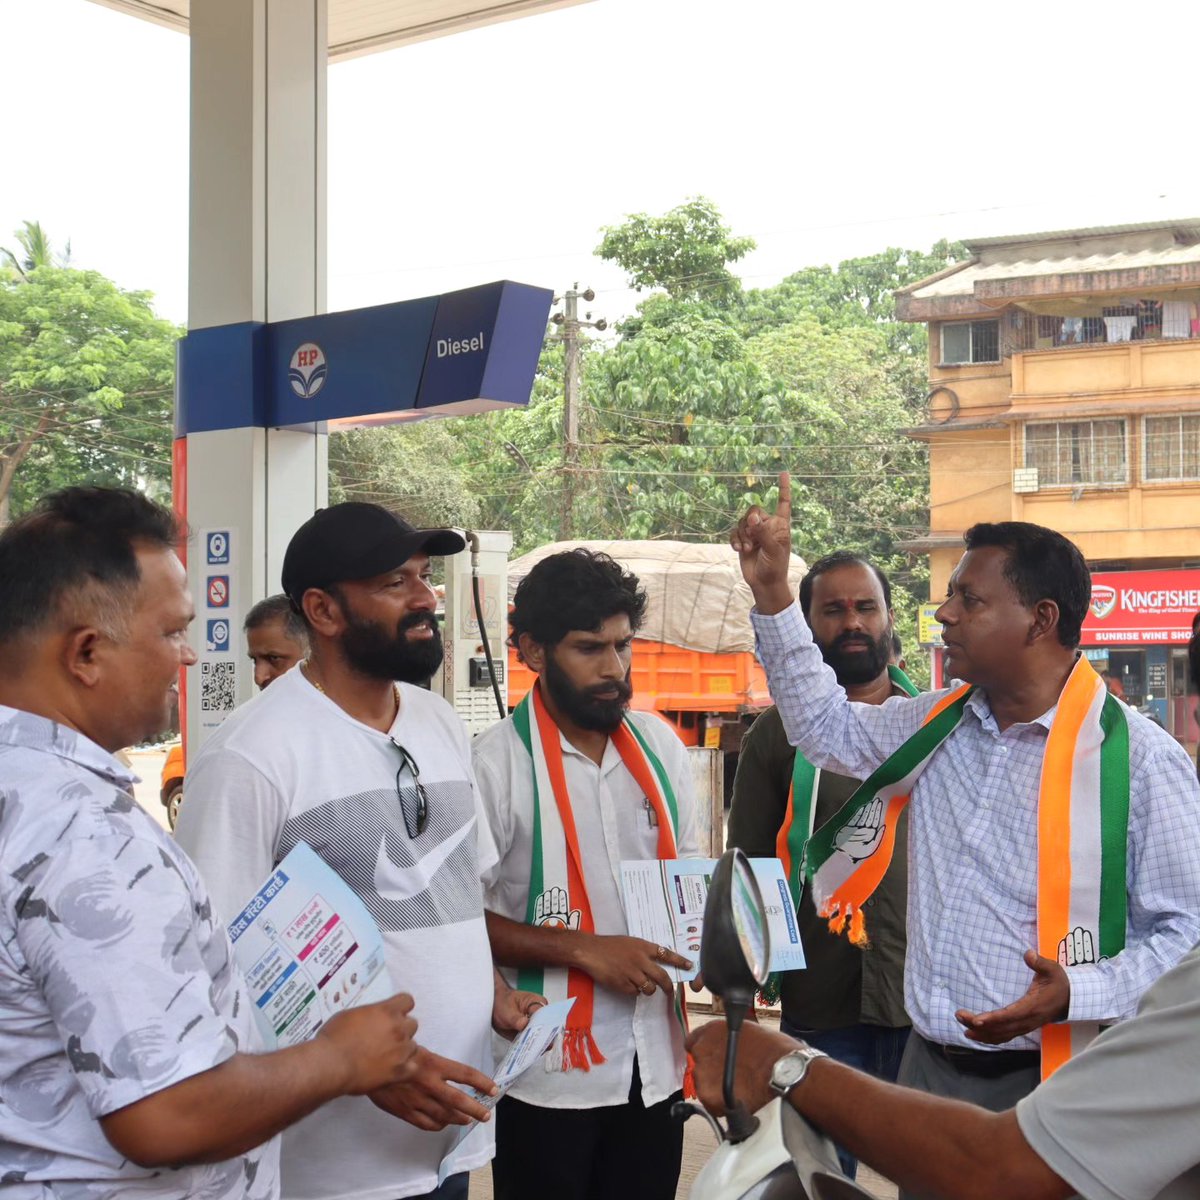 Engaging directly with the community in Sanvordem to share our vision for a stronger Goa. Let's all unite and build a future that embodies the hopes and dreams of every Goan! #HaathDegaSaathBadlengaHaalat #HaathBadlegaHaalat #CongressForProgress